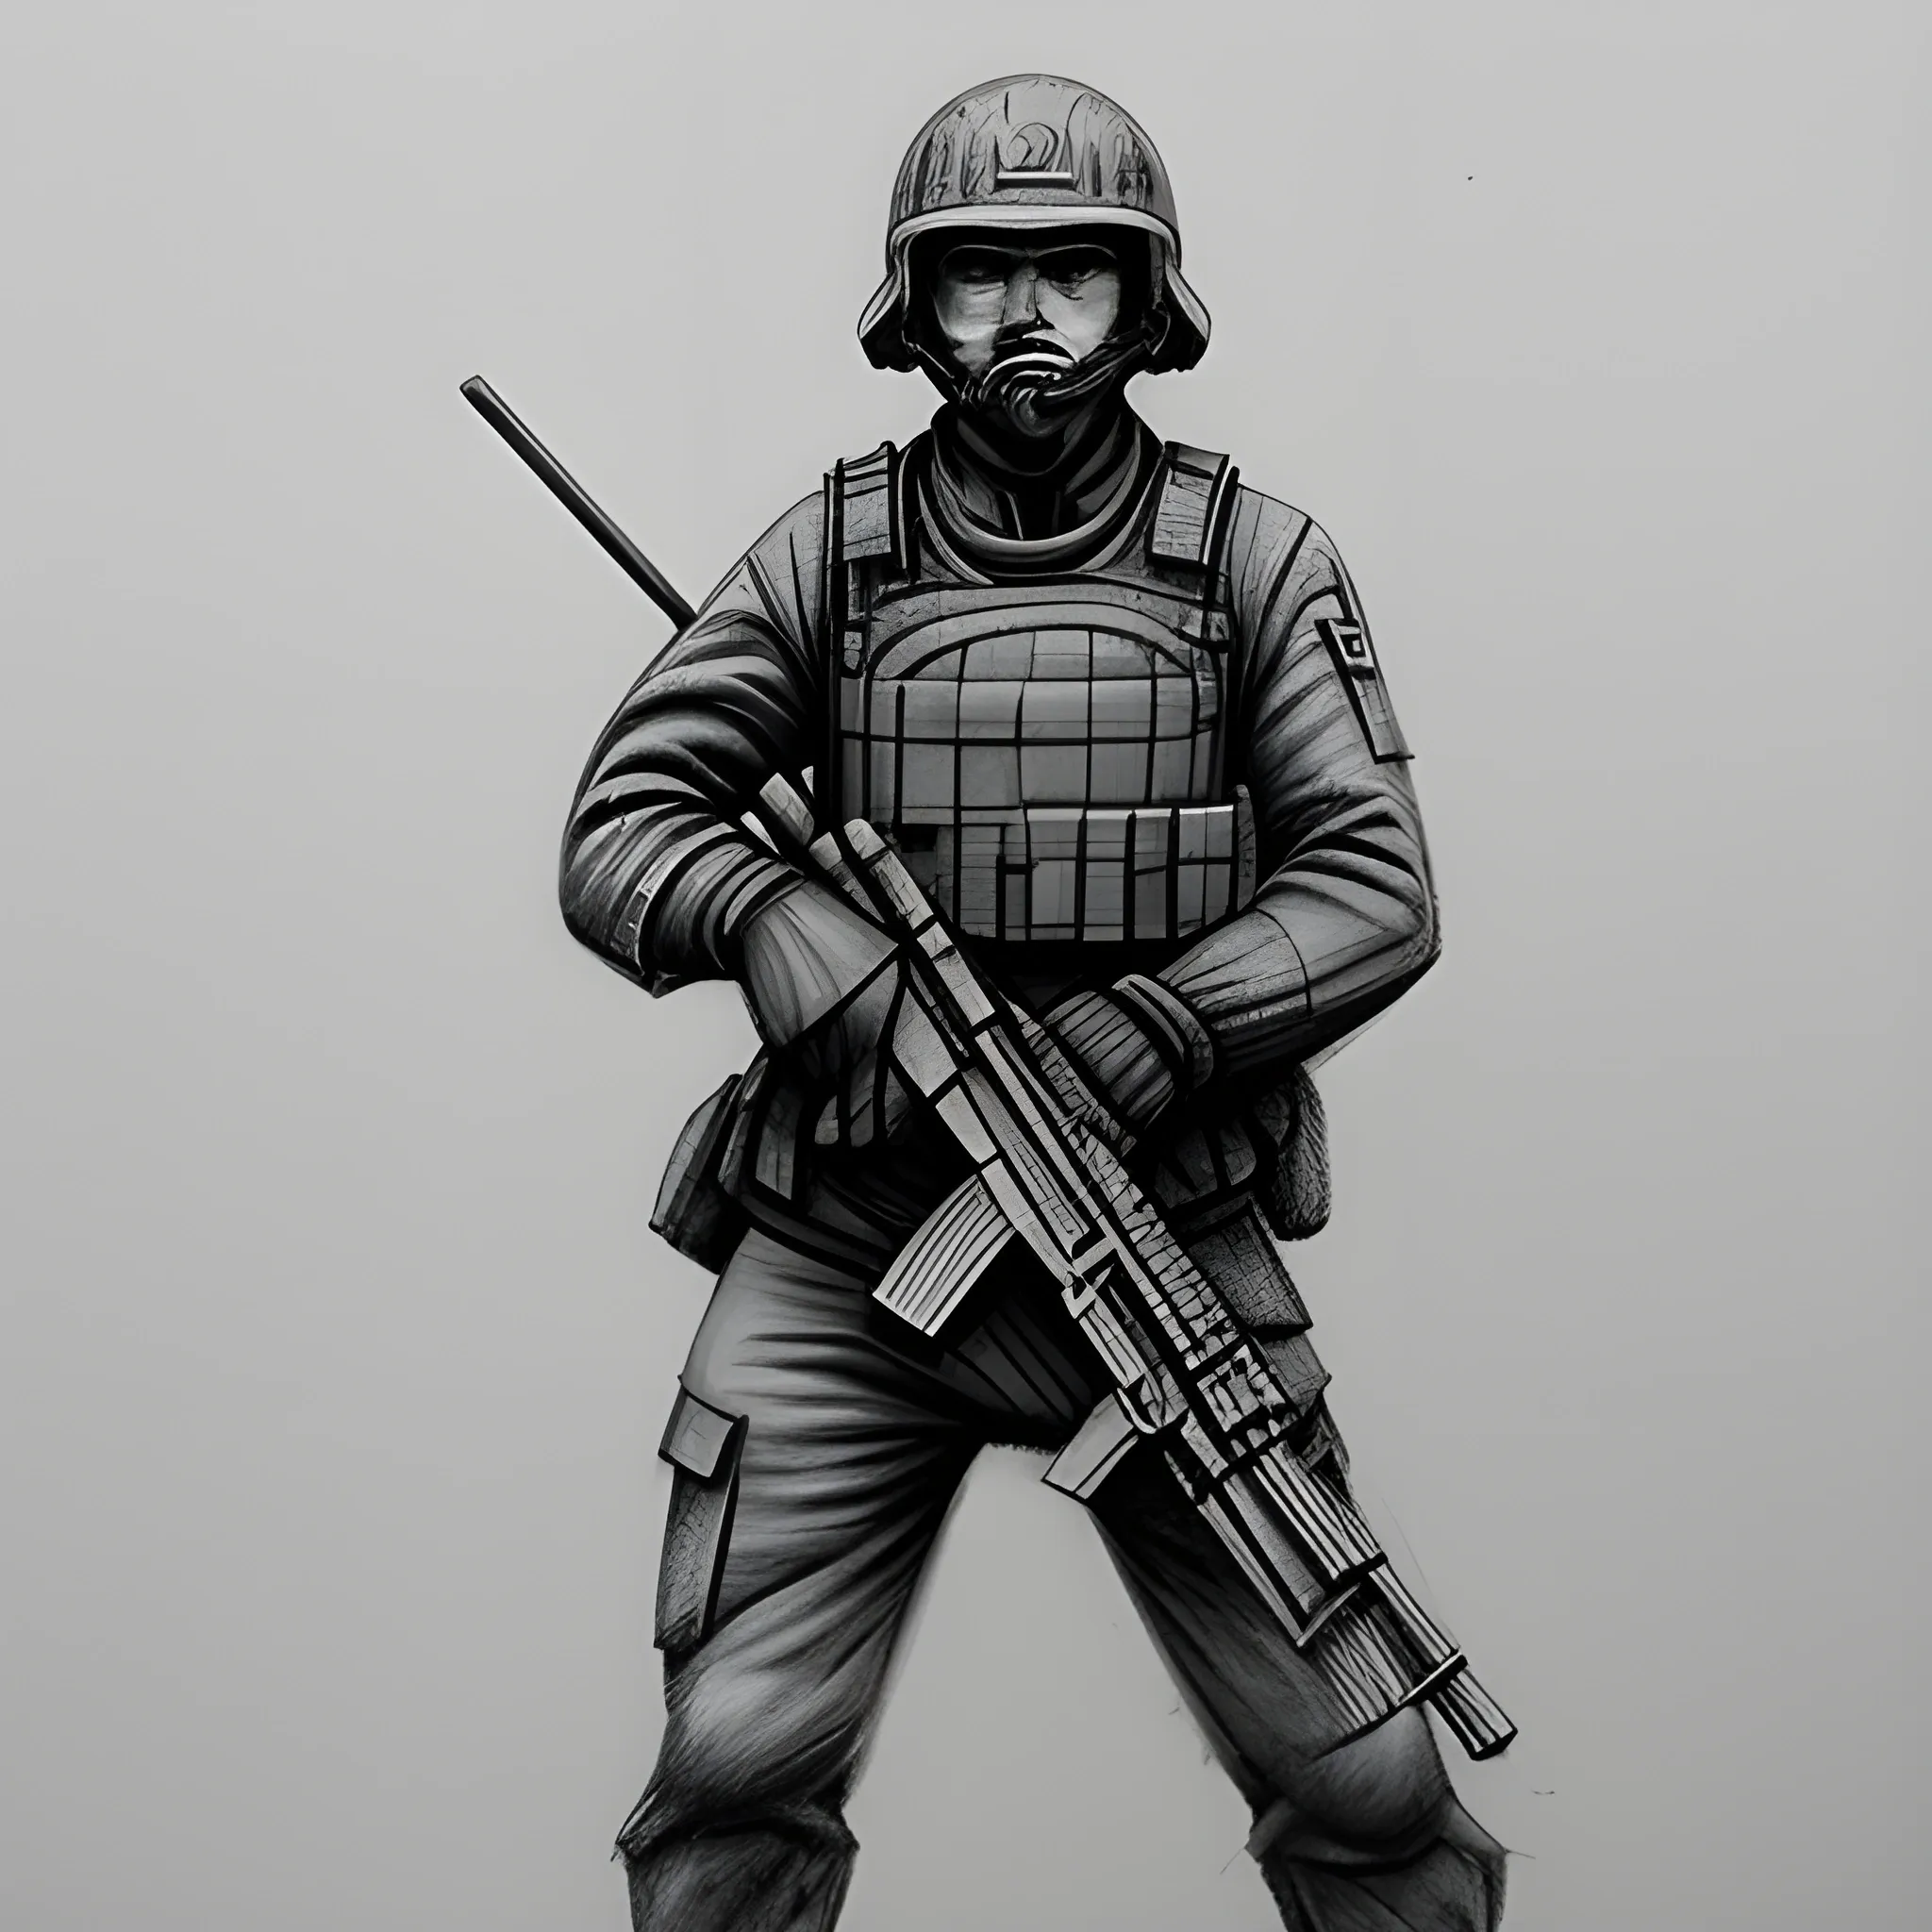 The Metro Red Army grunt wielding AK74, Pencil Sketch, 3D